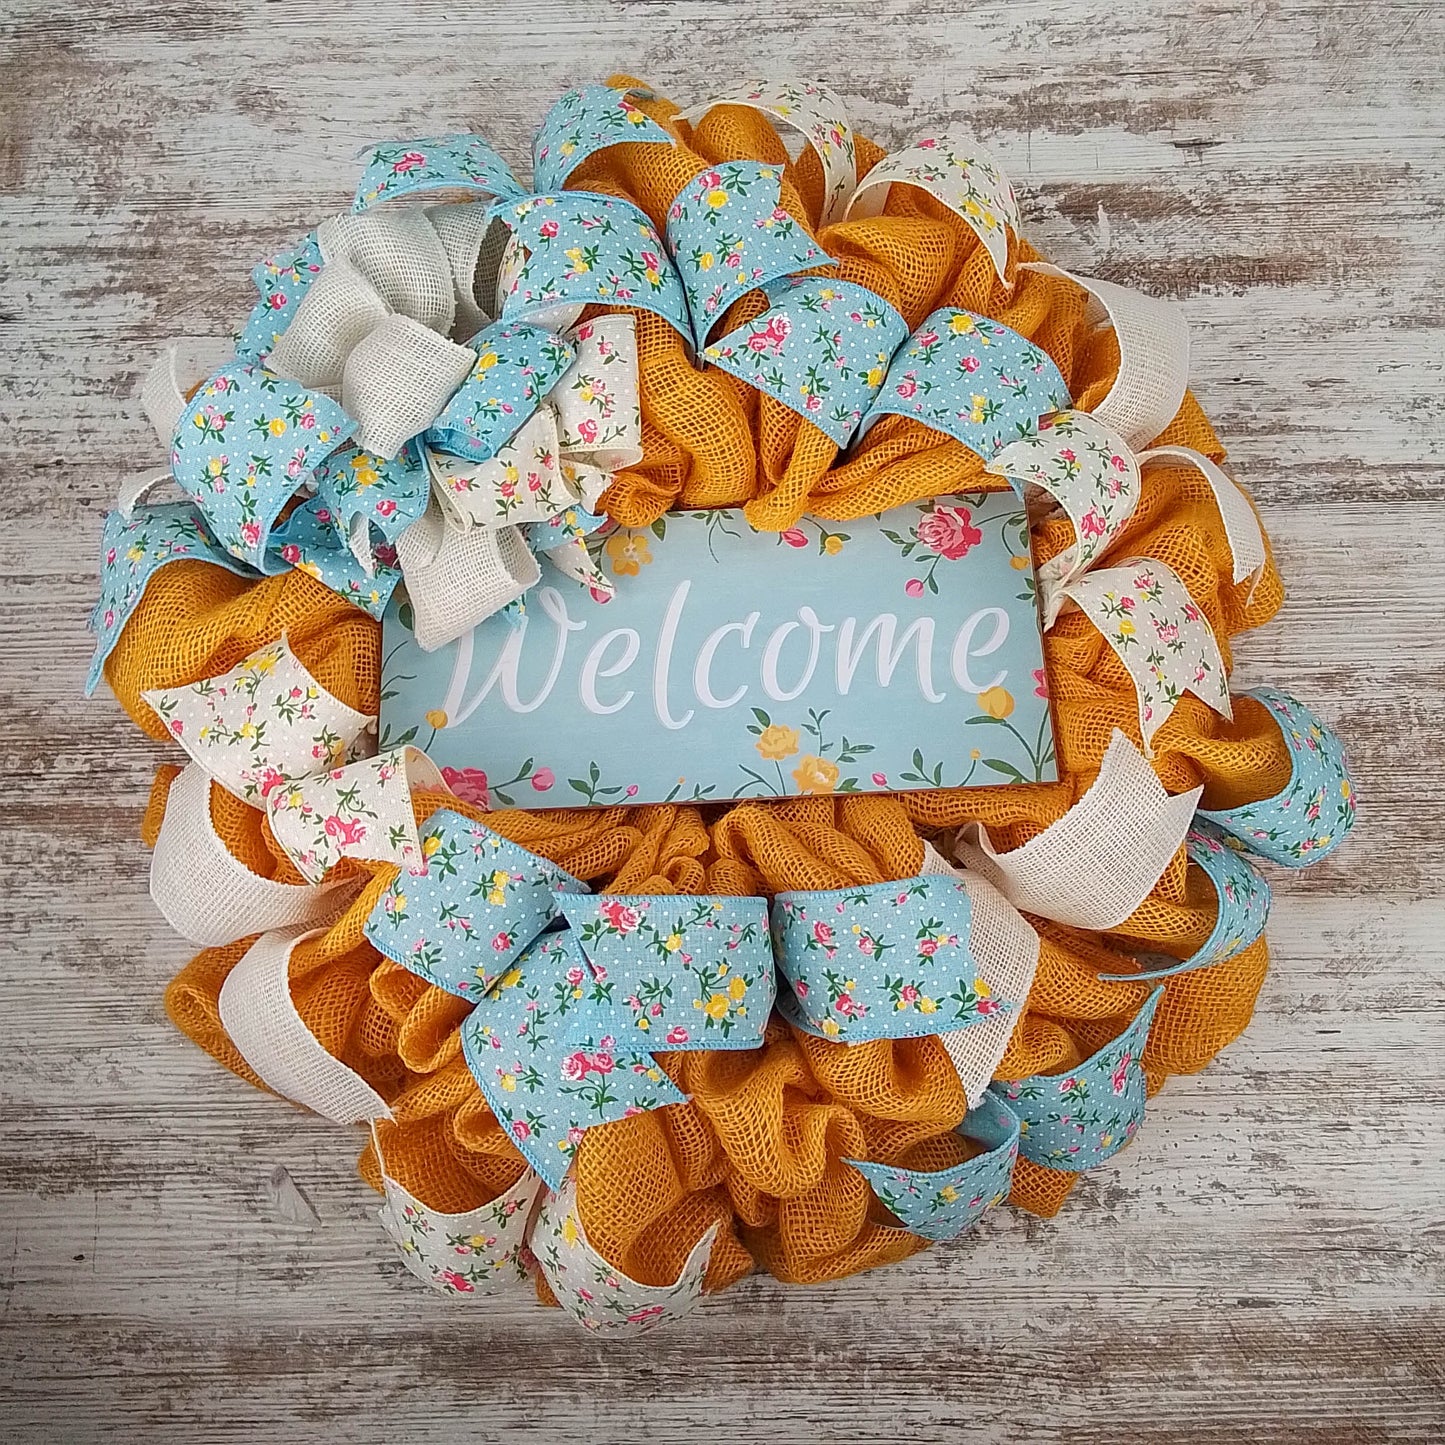 Floral Spring Welcome Wreath - Everyday Door Wreath - Yellow Pink Blue Burlap - Gift for Mom